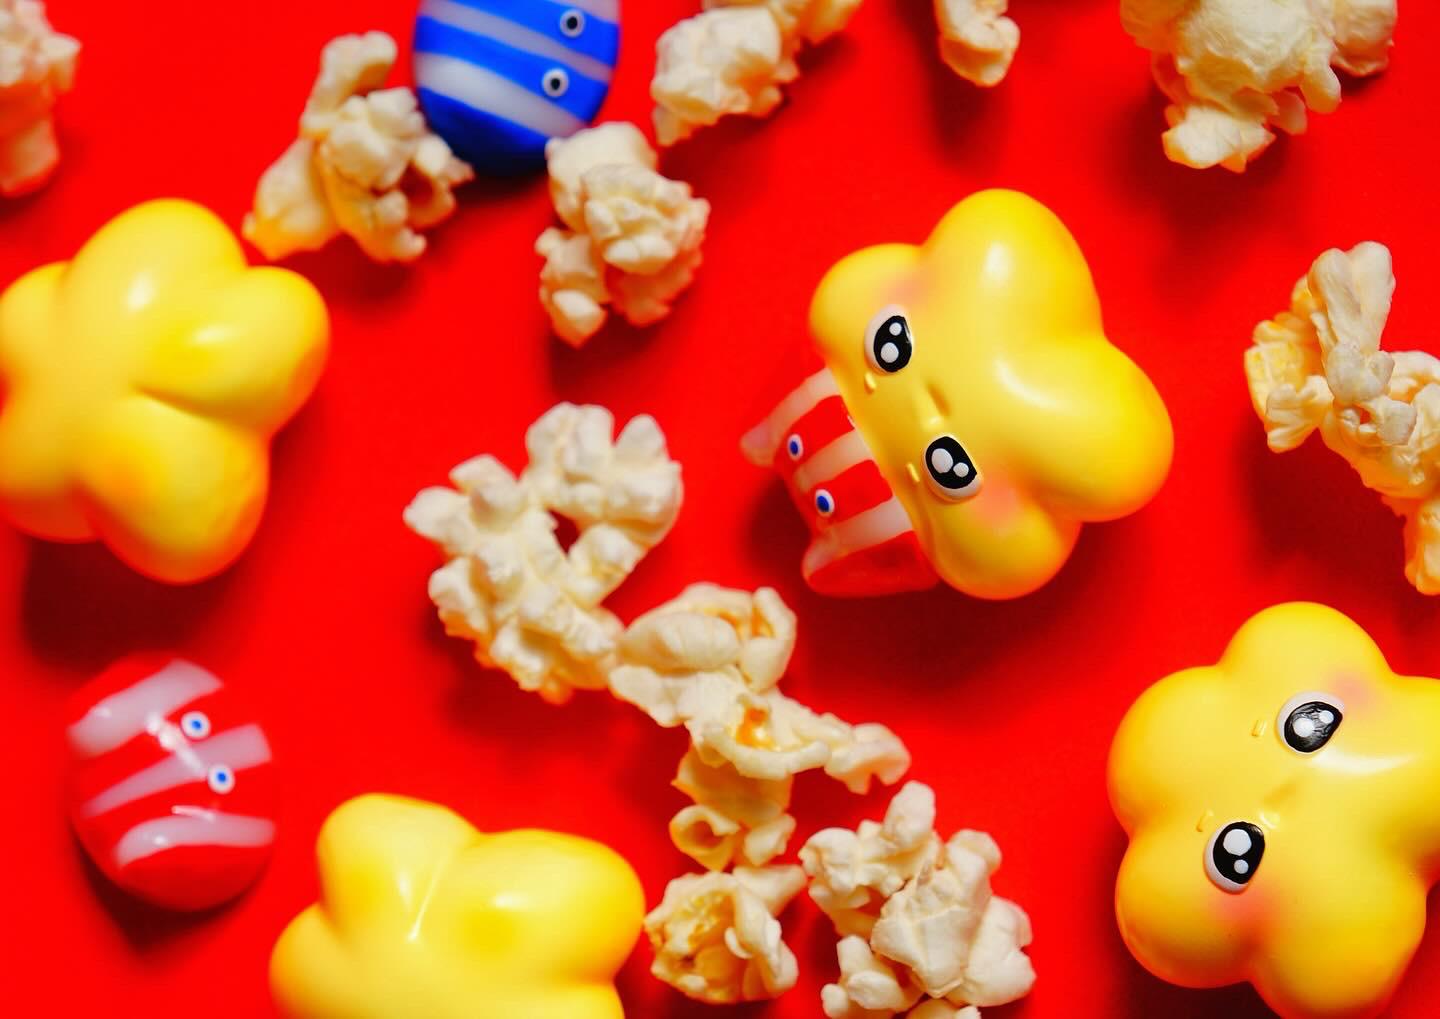 Popcorn, toys, and a yellow bell pepper on a red surface, with a close-up of a blue striped toy and a yellow object, part of the Popstar collection.